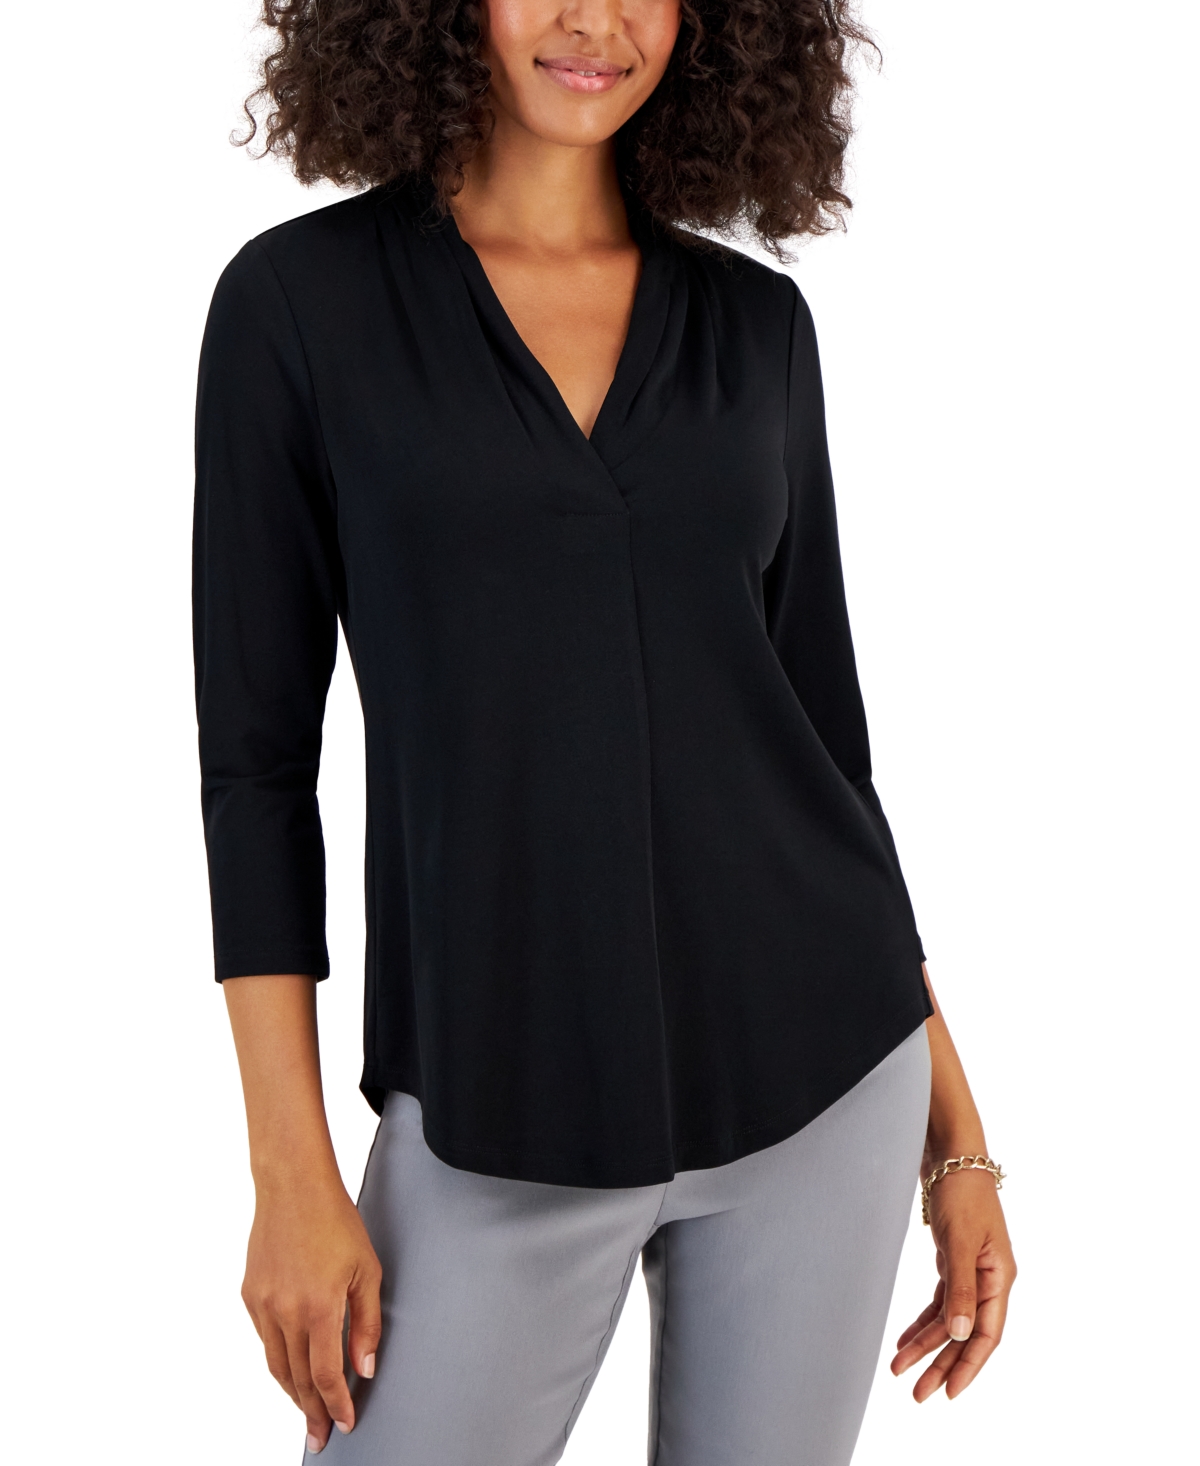 Women's 3/4 Sleeve V-Neck Pleat Top, Created for Macy's - Phlox Pink